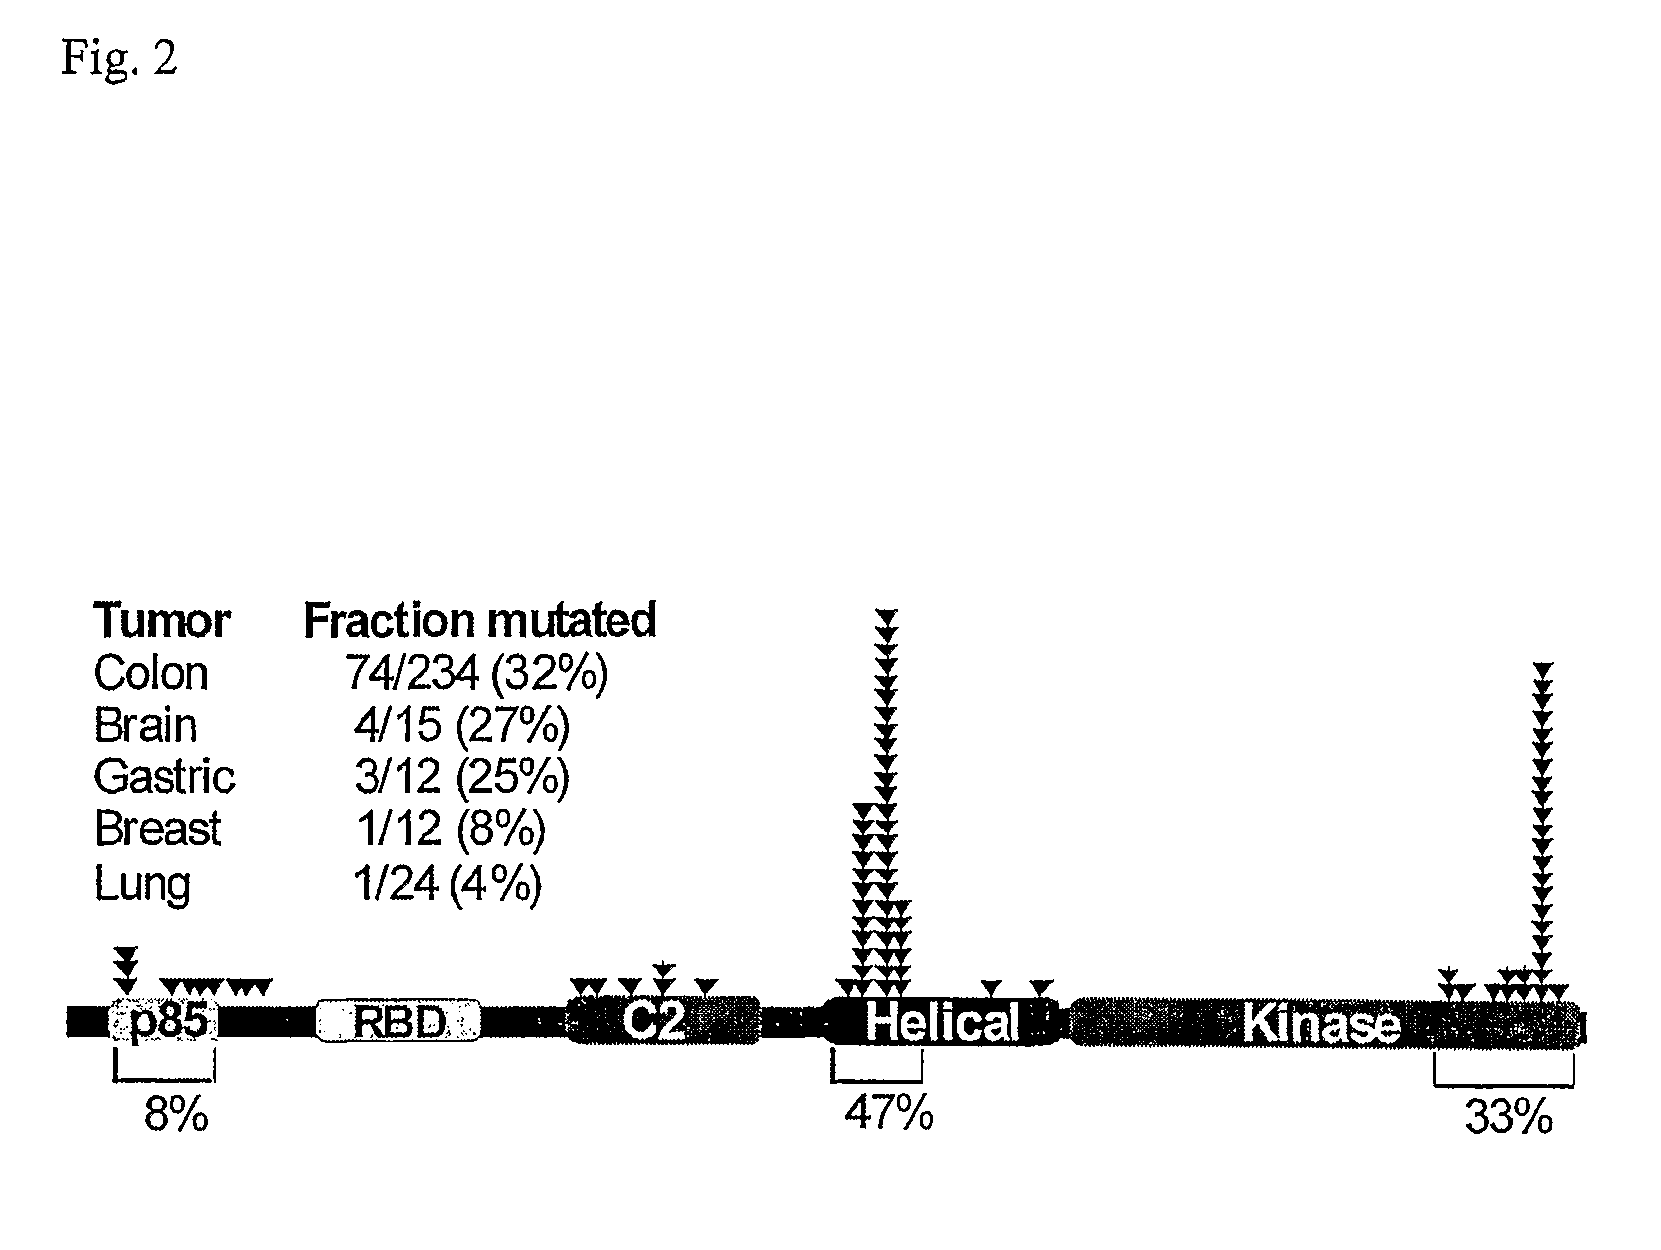 Mutations of the PIK3CA gene in human cancers